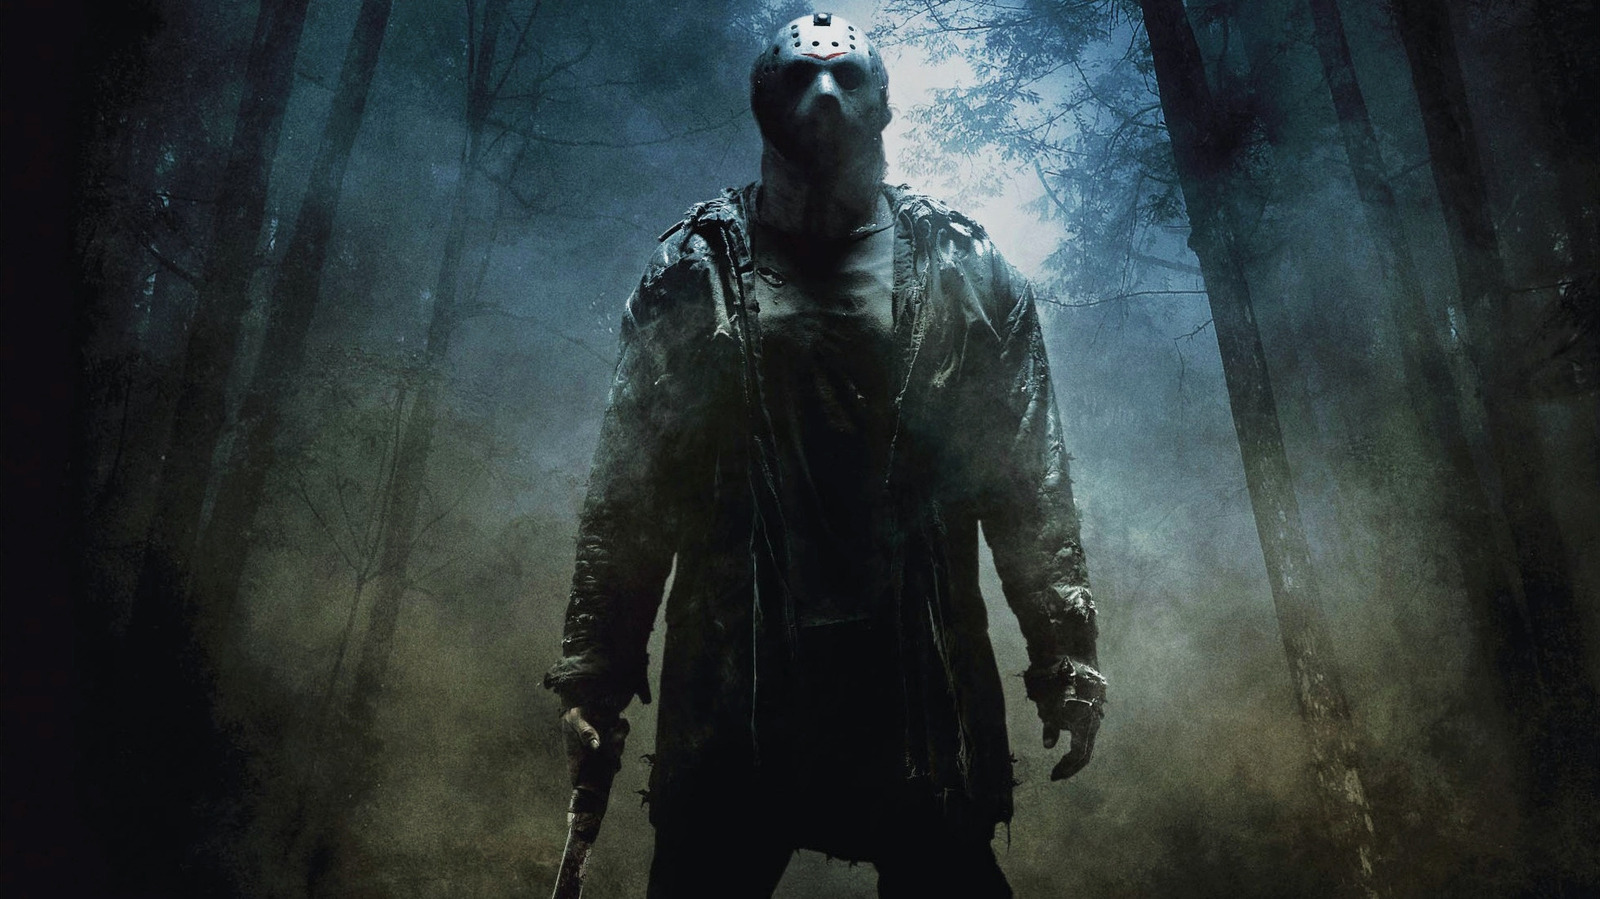 If one studio was to make another Friday the 13th game, I'd love